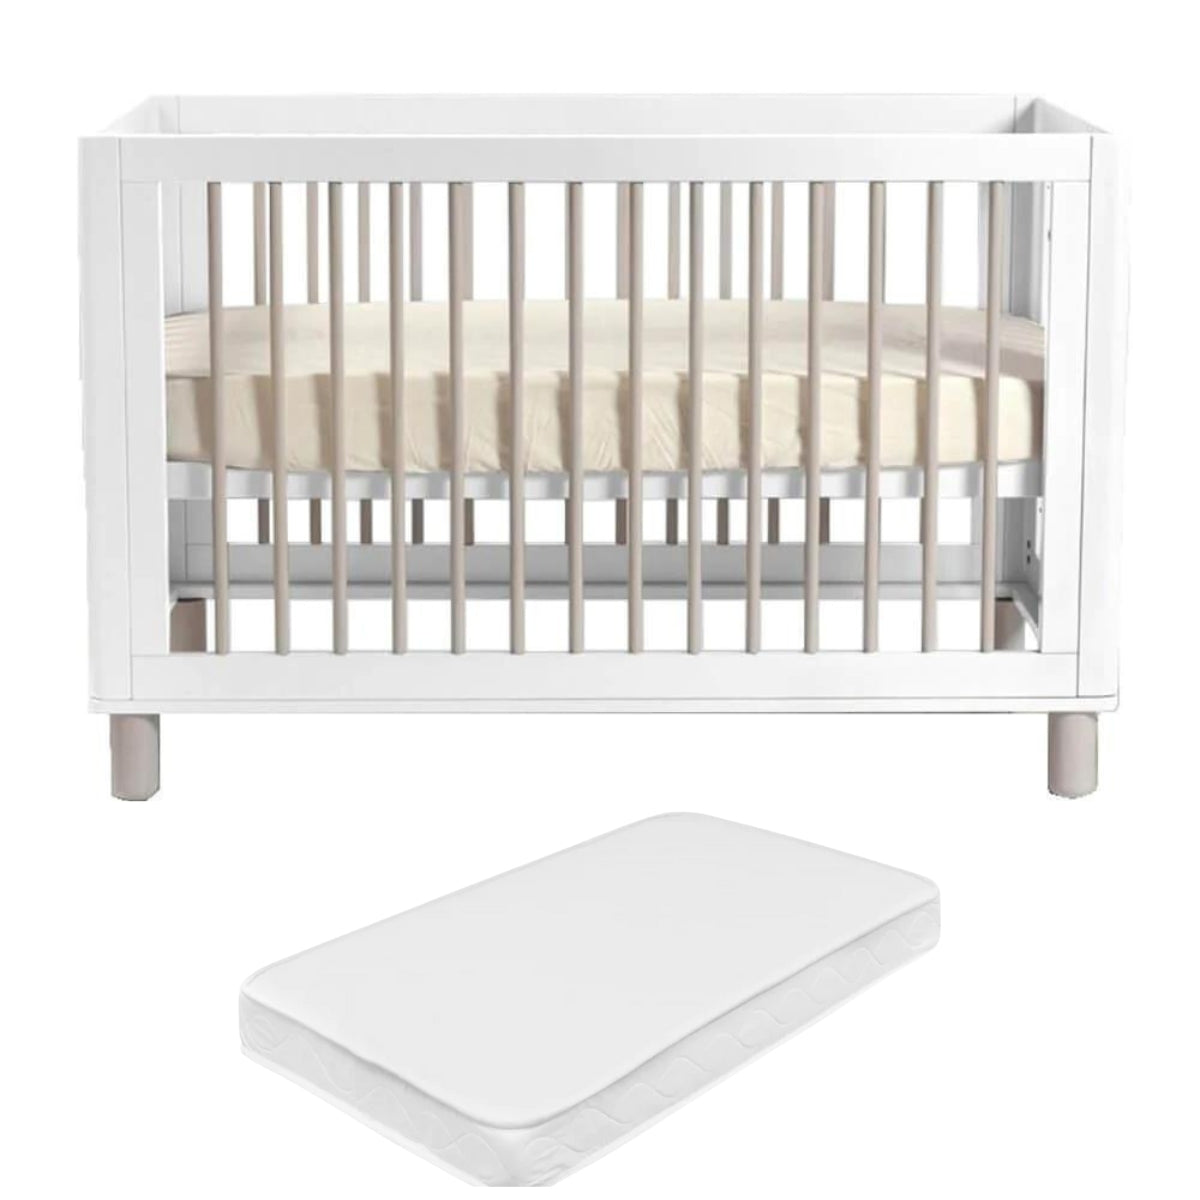 Cocoon Allure Cot with Mattress -4 in 1 White / Natural wash